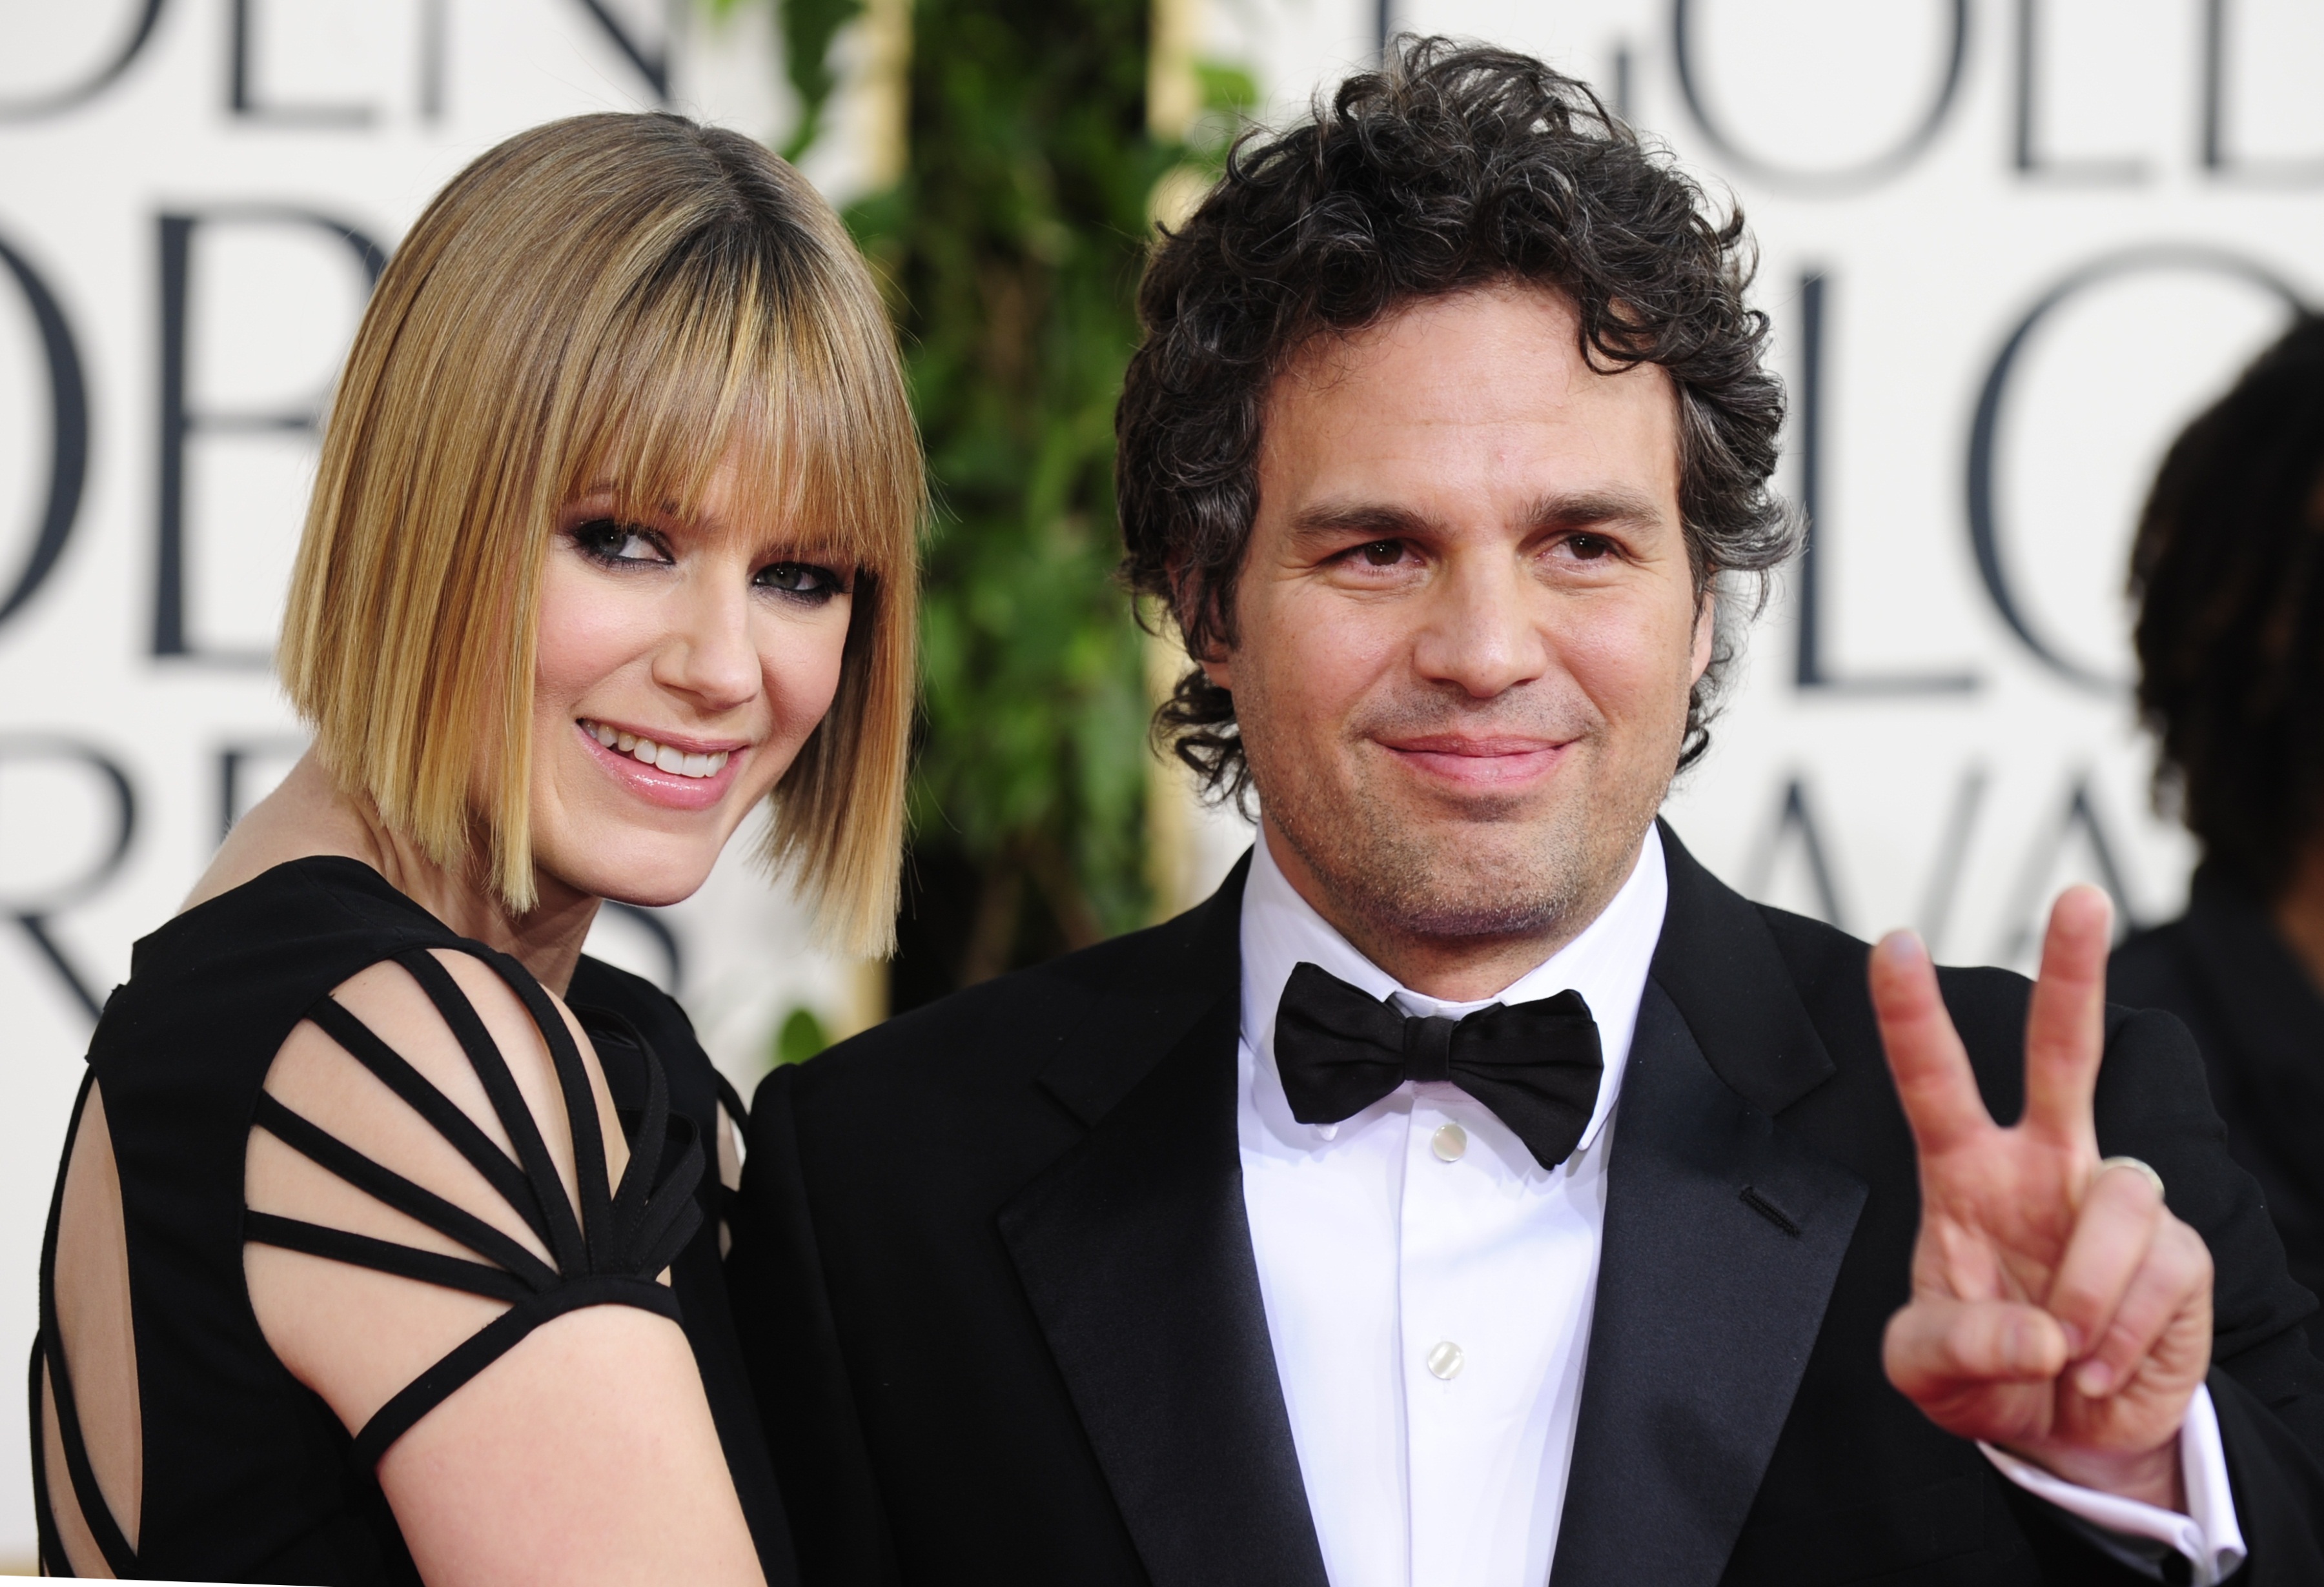 Actor Mark Ruffalo (R) and wife Sunrise Ruffalo arrive  on the red carpet for the 68th annual Golden Globe awards at the Beverly Hilton Hotel in Beverly Hills, California January 16, 2011. AFP PHOTO / Robyn Beck (Photo credit should read ROBYN BECK/AFP/Getty Images)